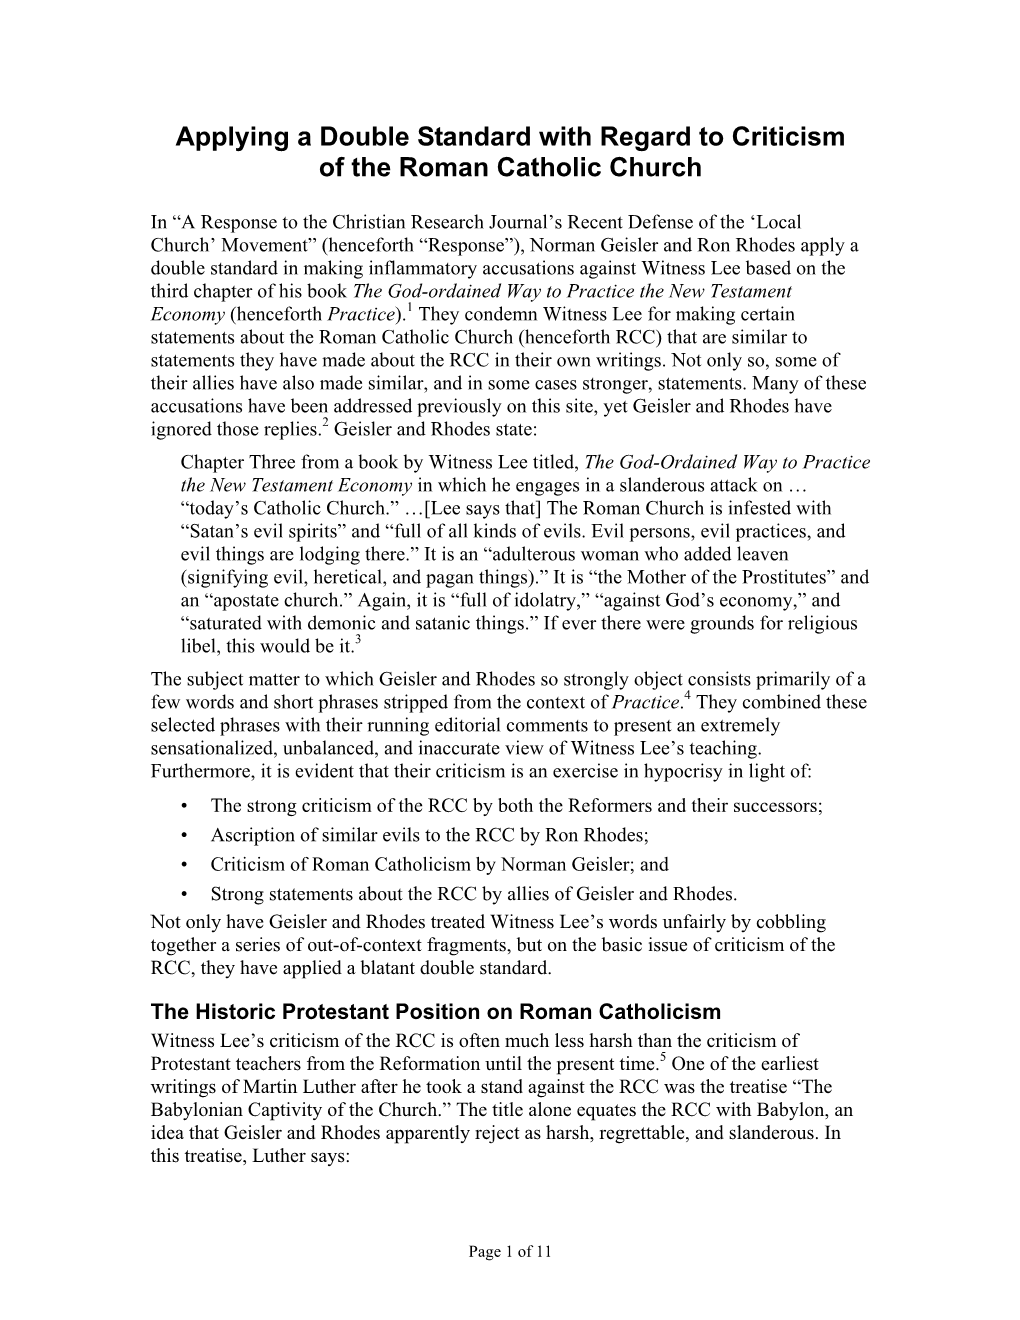 Applying a Double Standard with Regard to Criticism of the Roman Catholic Church